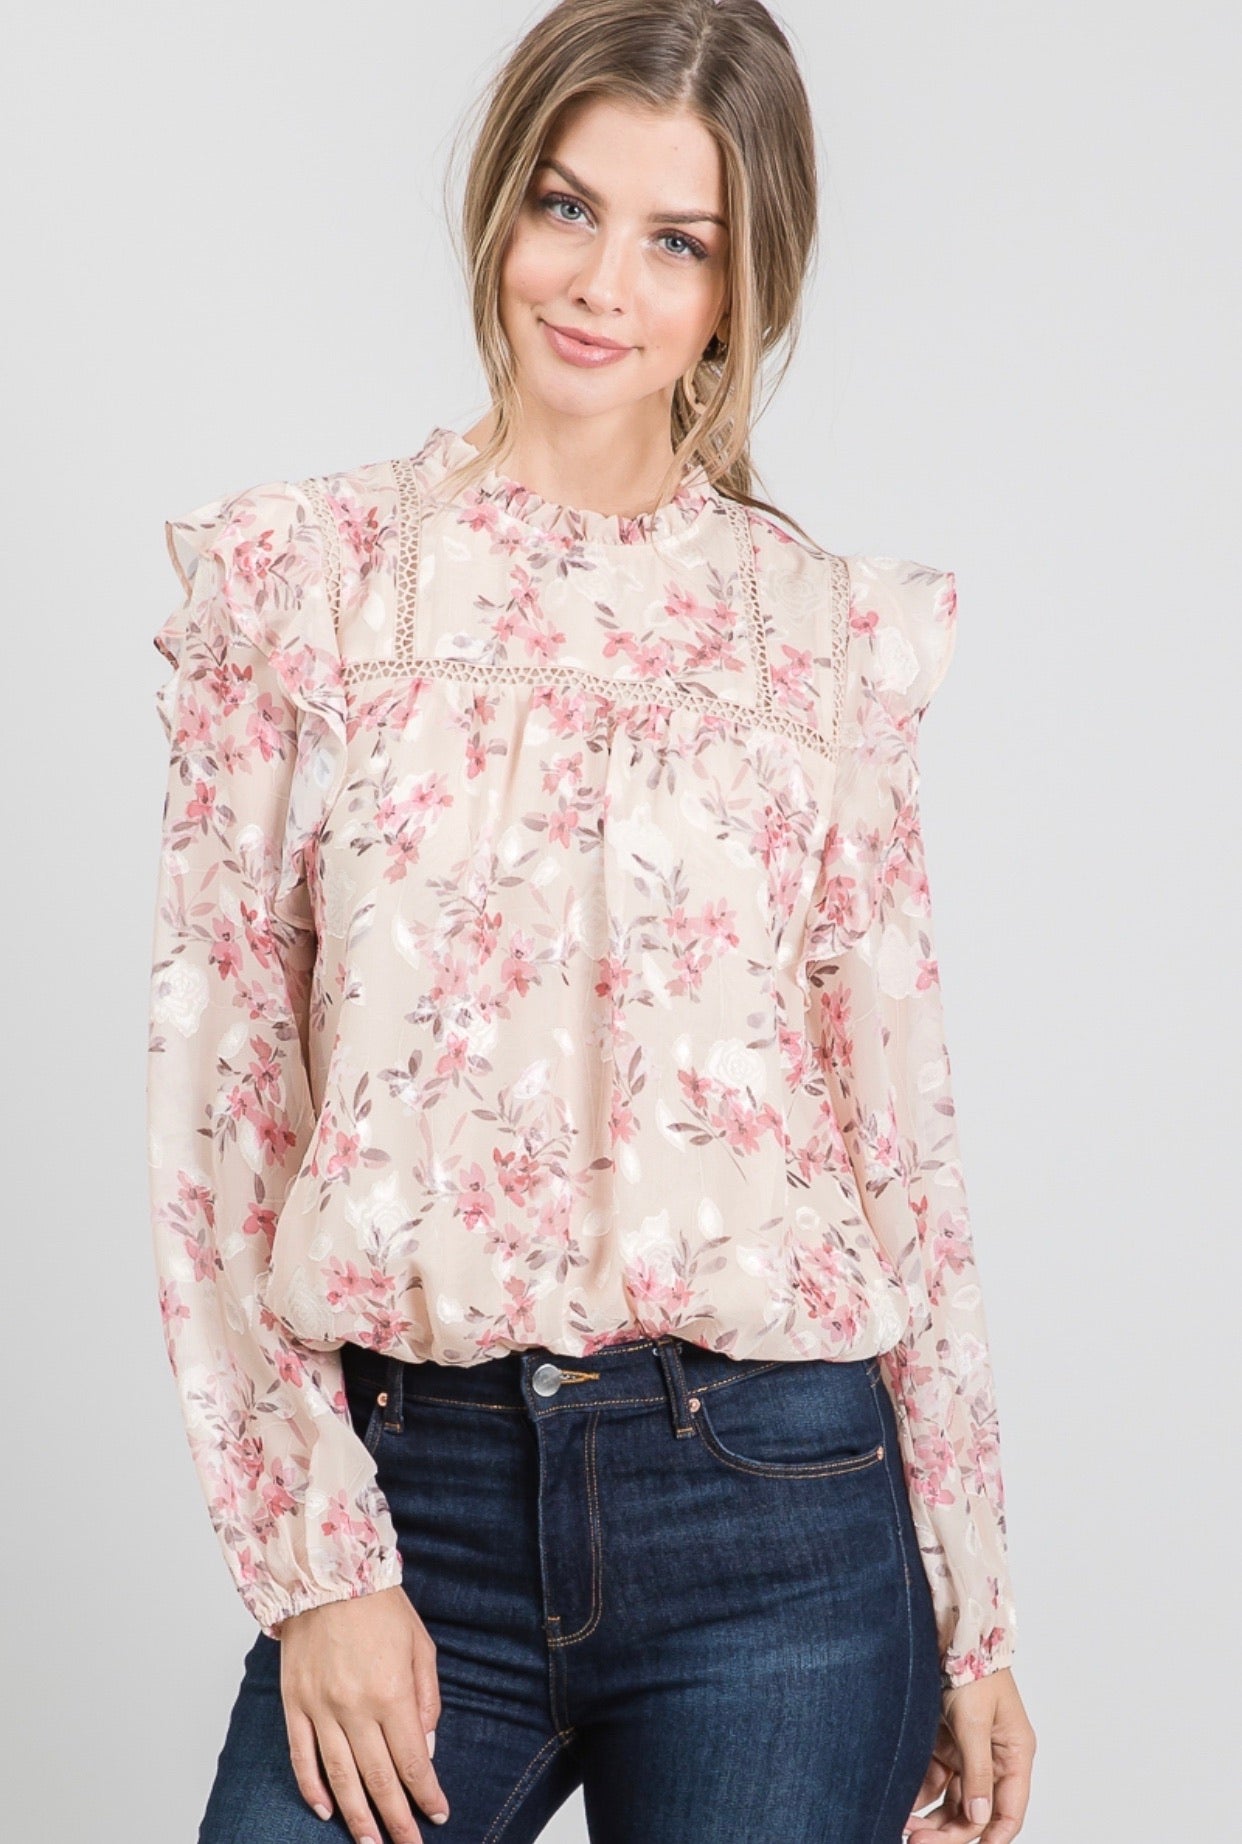 Cuffed Printed Blouse Bodysuit with Trim Detail - Forever Western Boutique